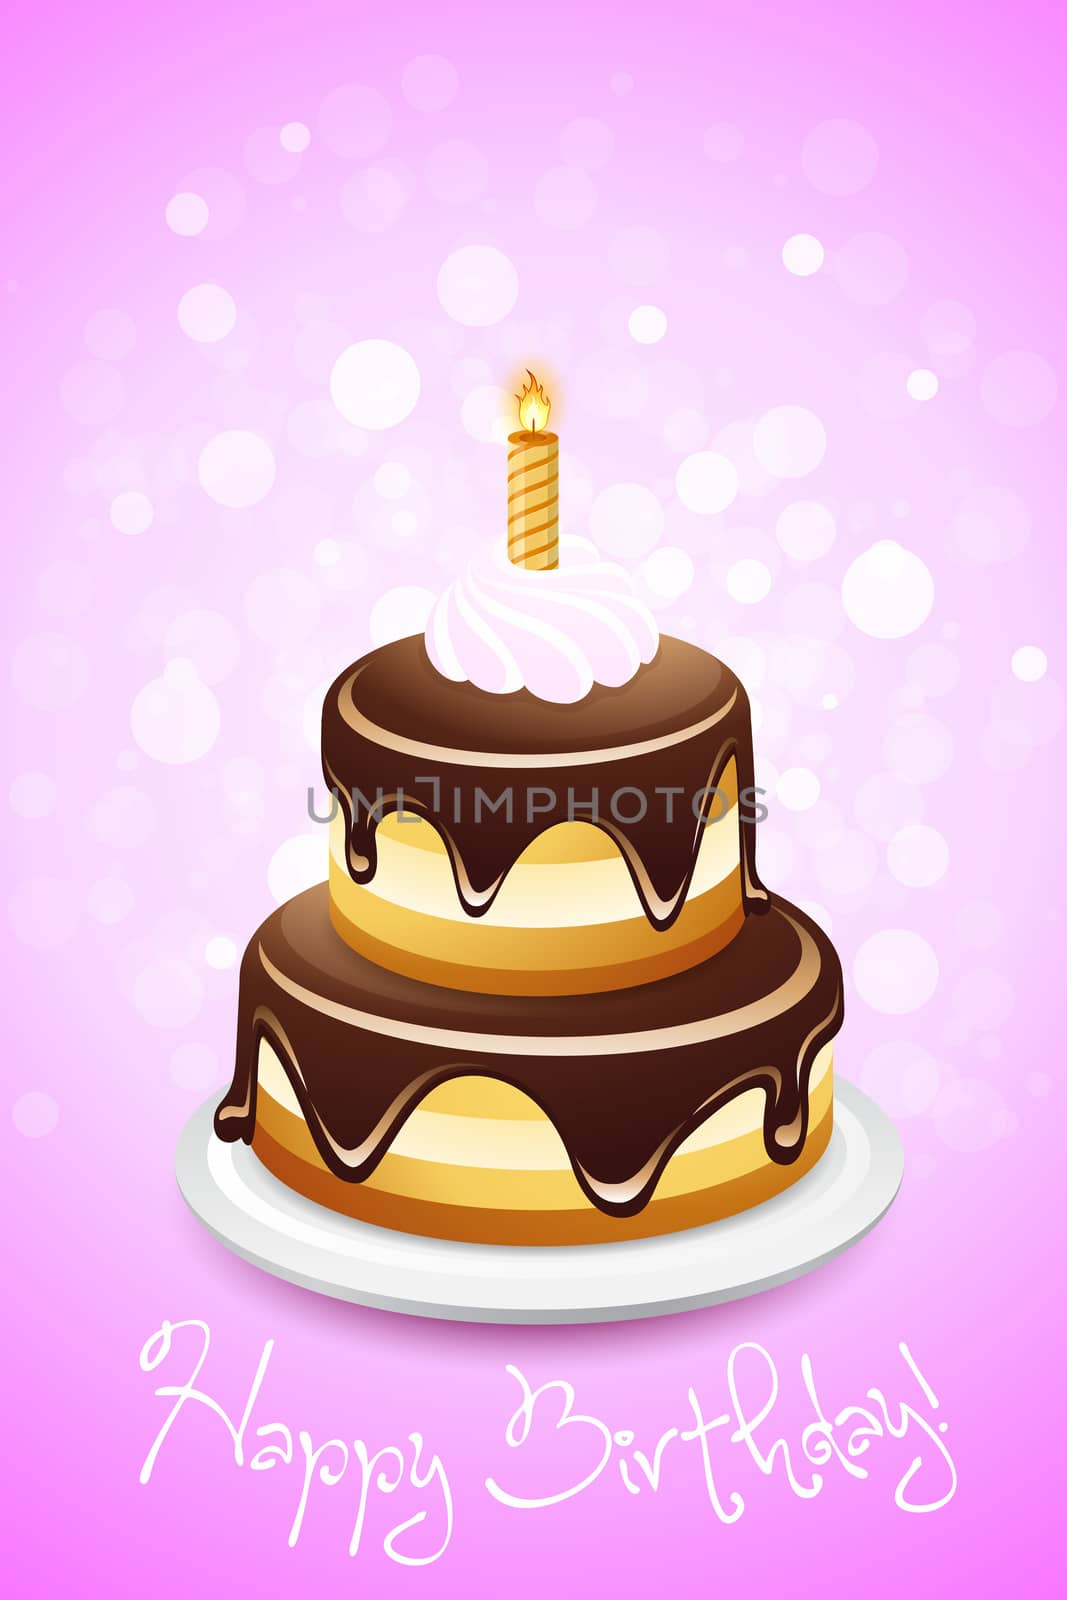 Happy Birthday Card with Cake and One Candle